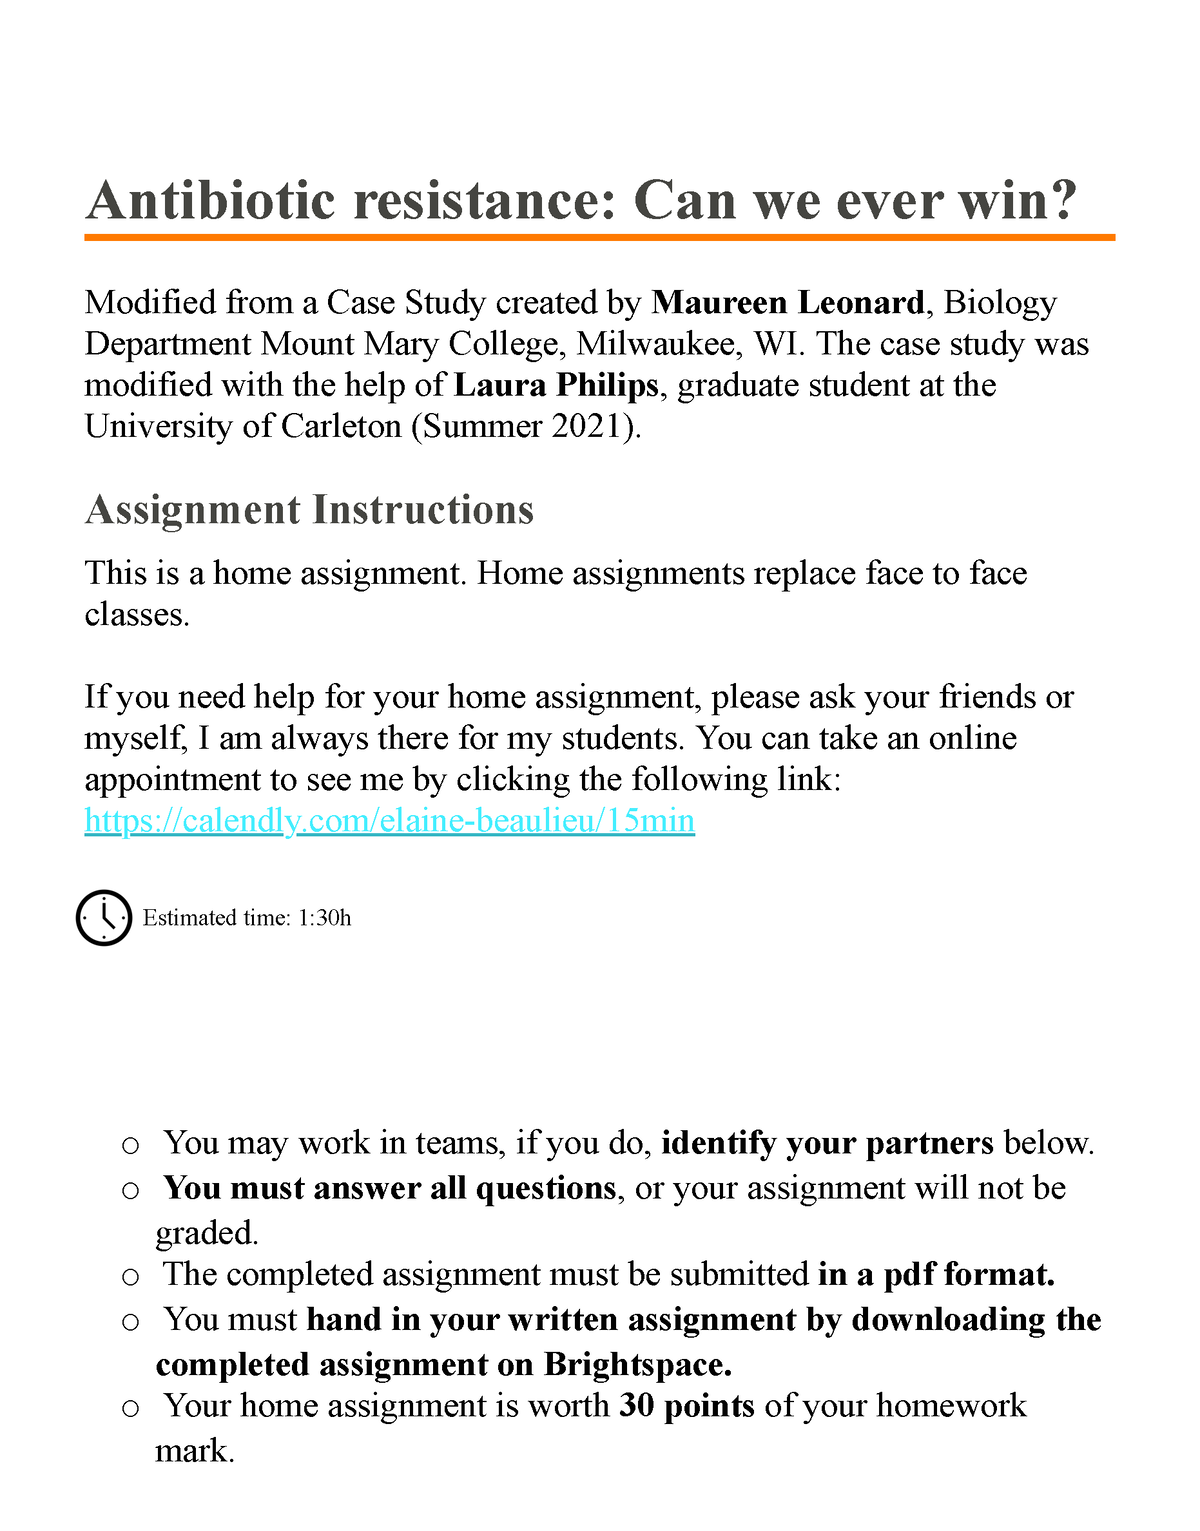 Antibiotic resistance The case study was ####### modified with the